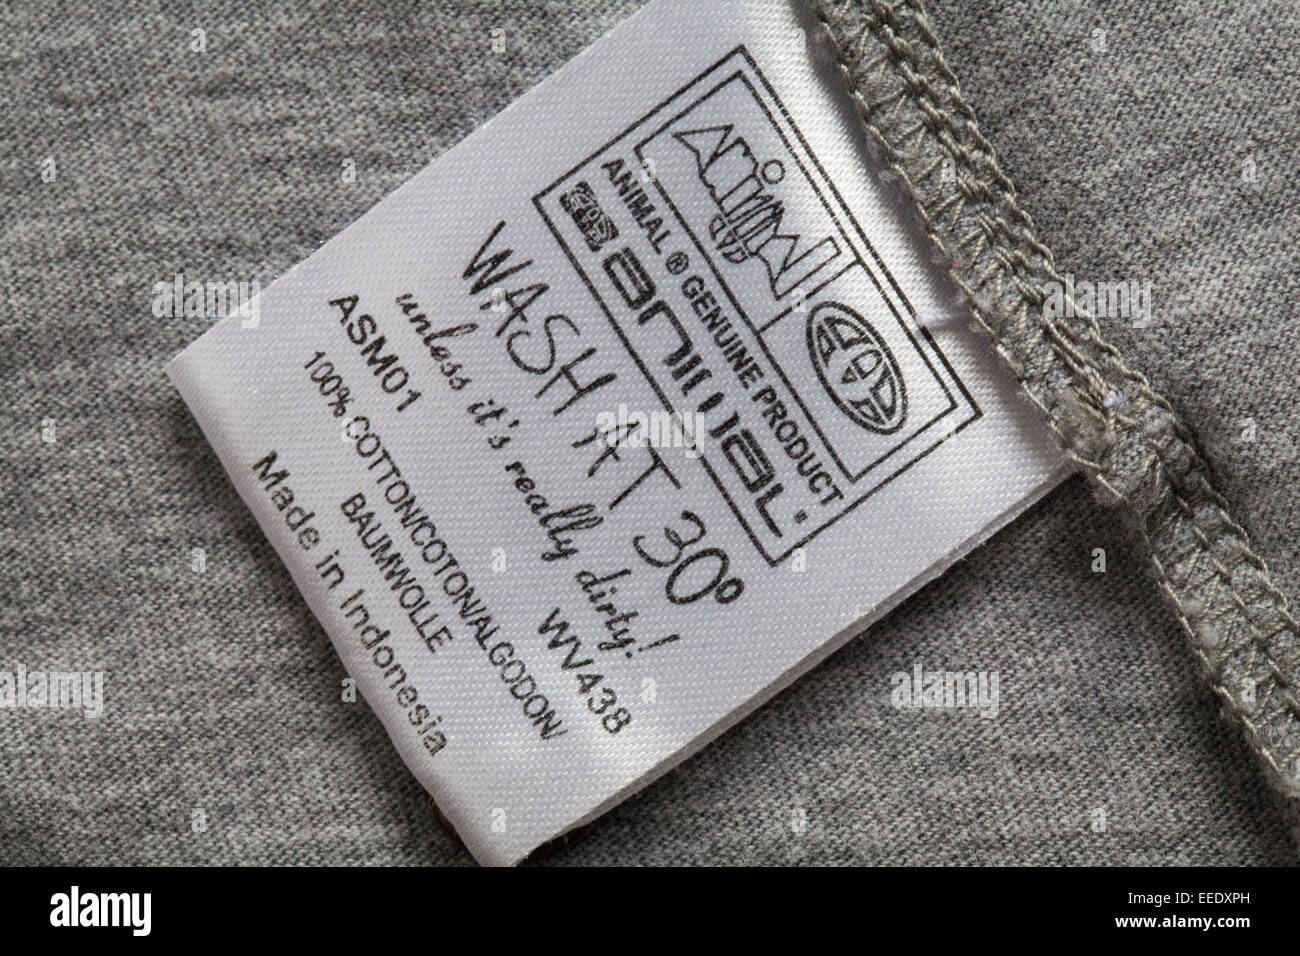 Genuine product Animal label in 100% cotton garment Made in Indonesia wash  at 30 degrees unless it's really dirty - sold in the UK United Kingdom  Stock Photo - Alamy